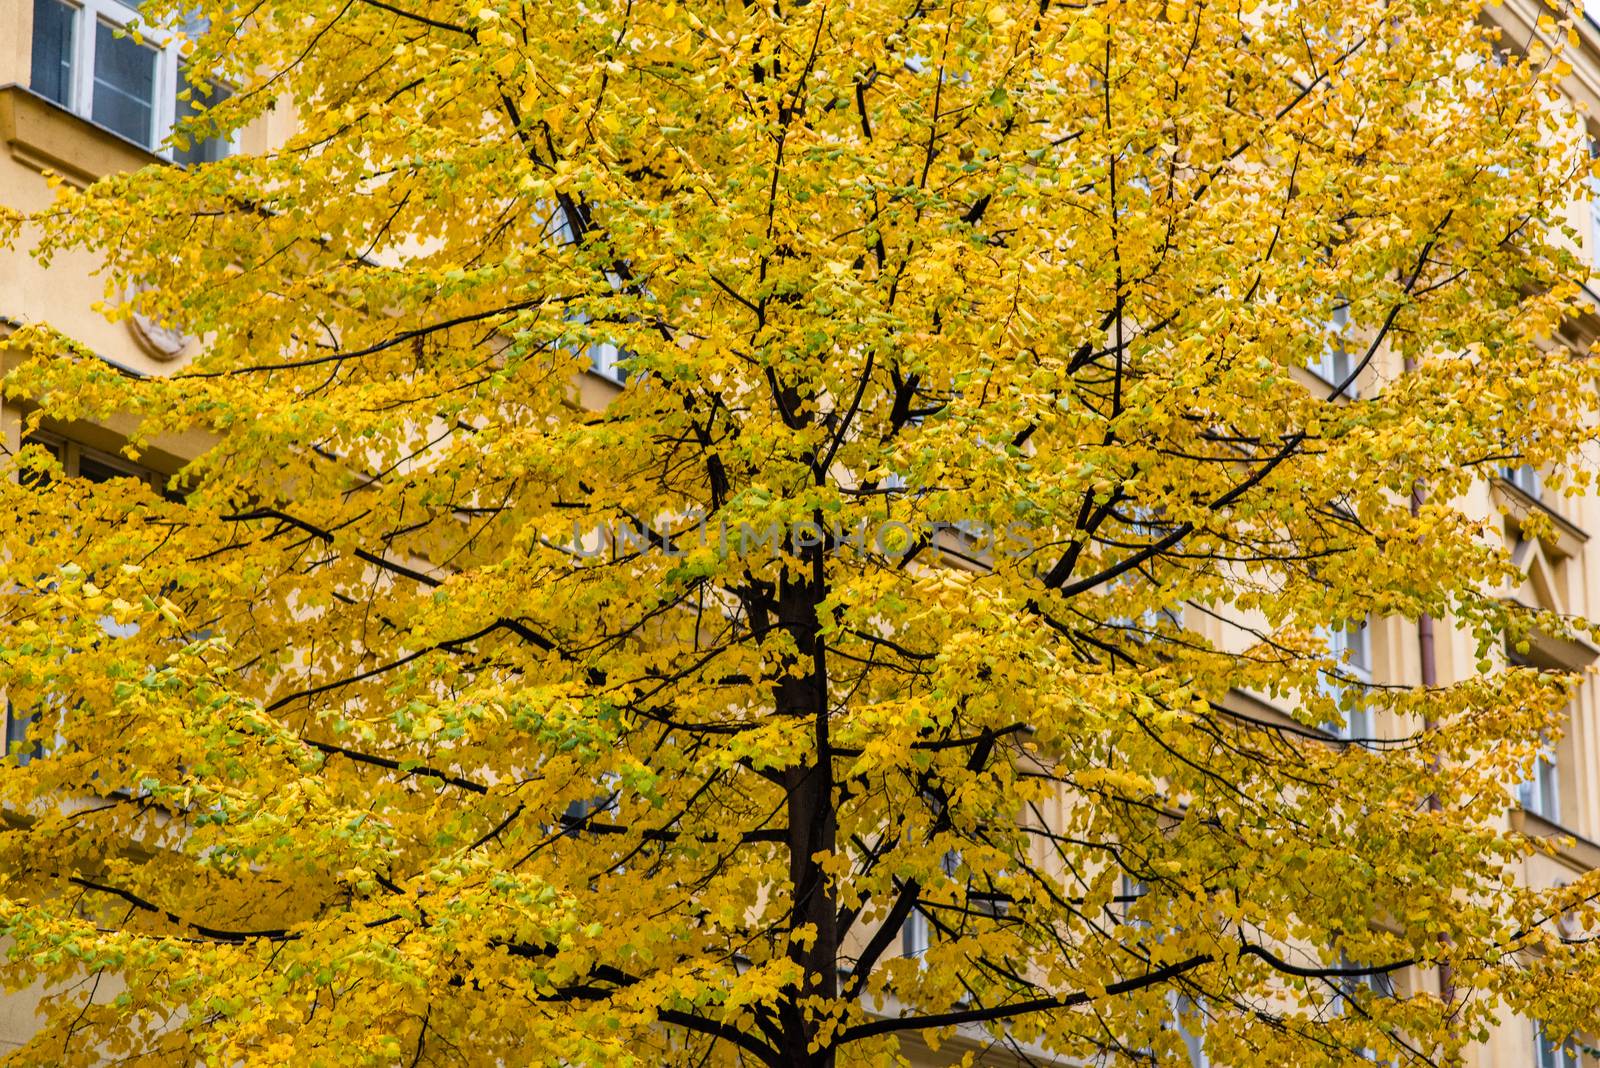 Treetop with yellow leaves in a park during autumn